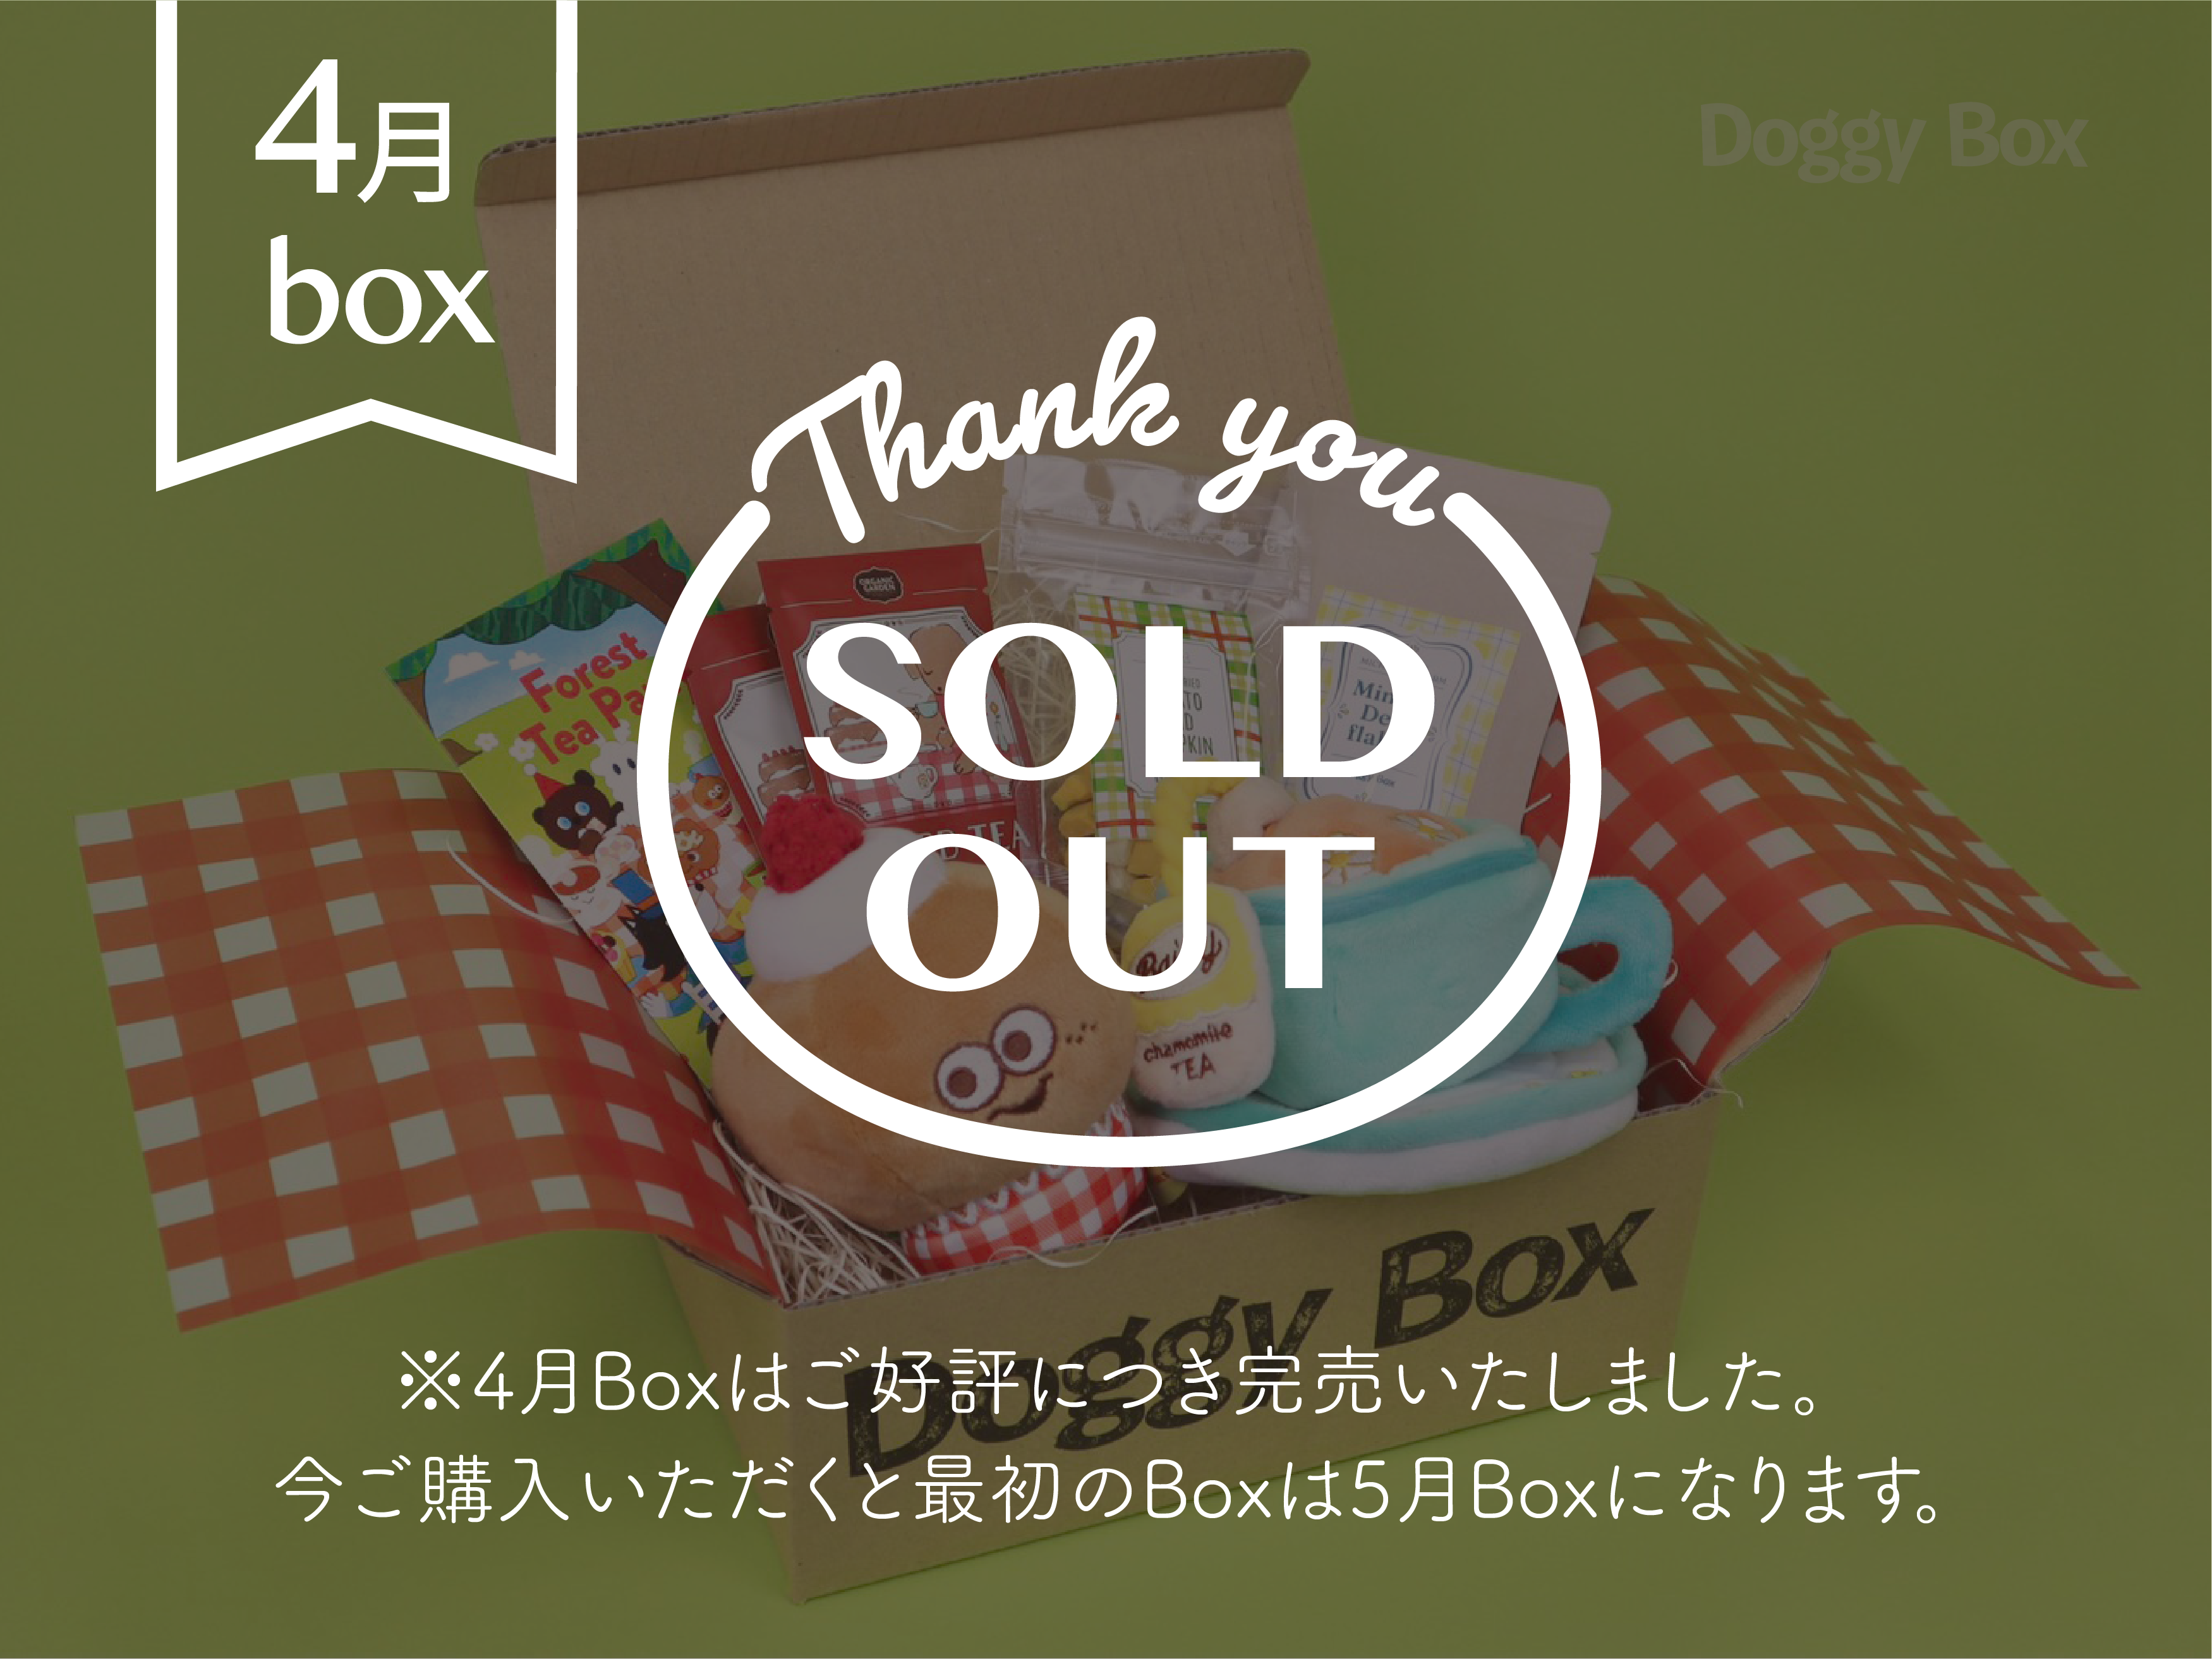 SOLD OUT ご購入のが決定致しました！ | bluesandsacademy.org